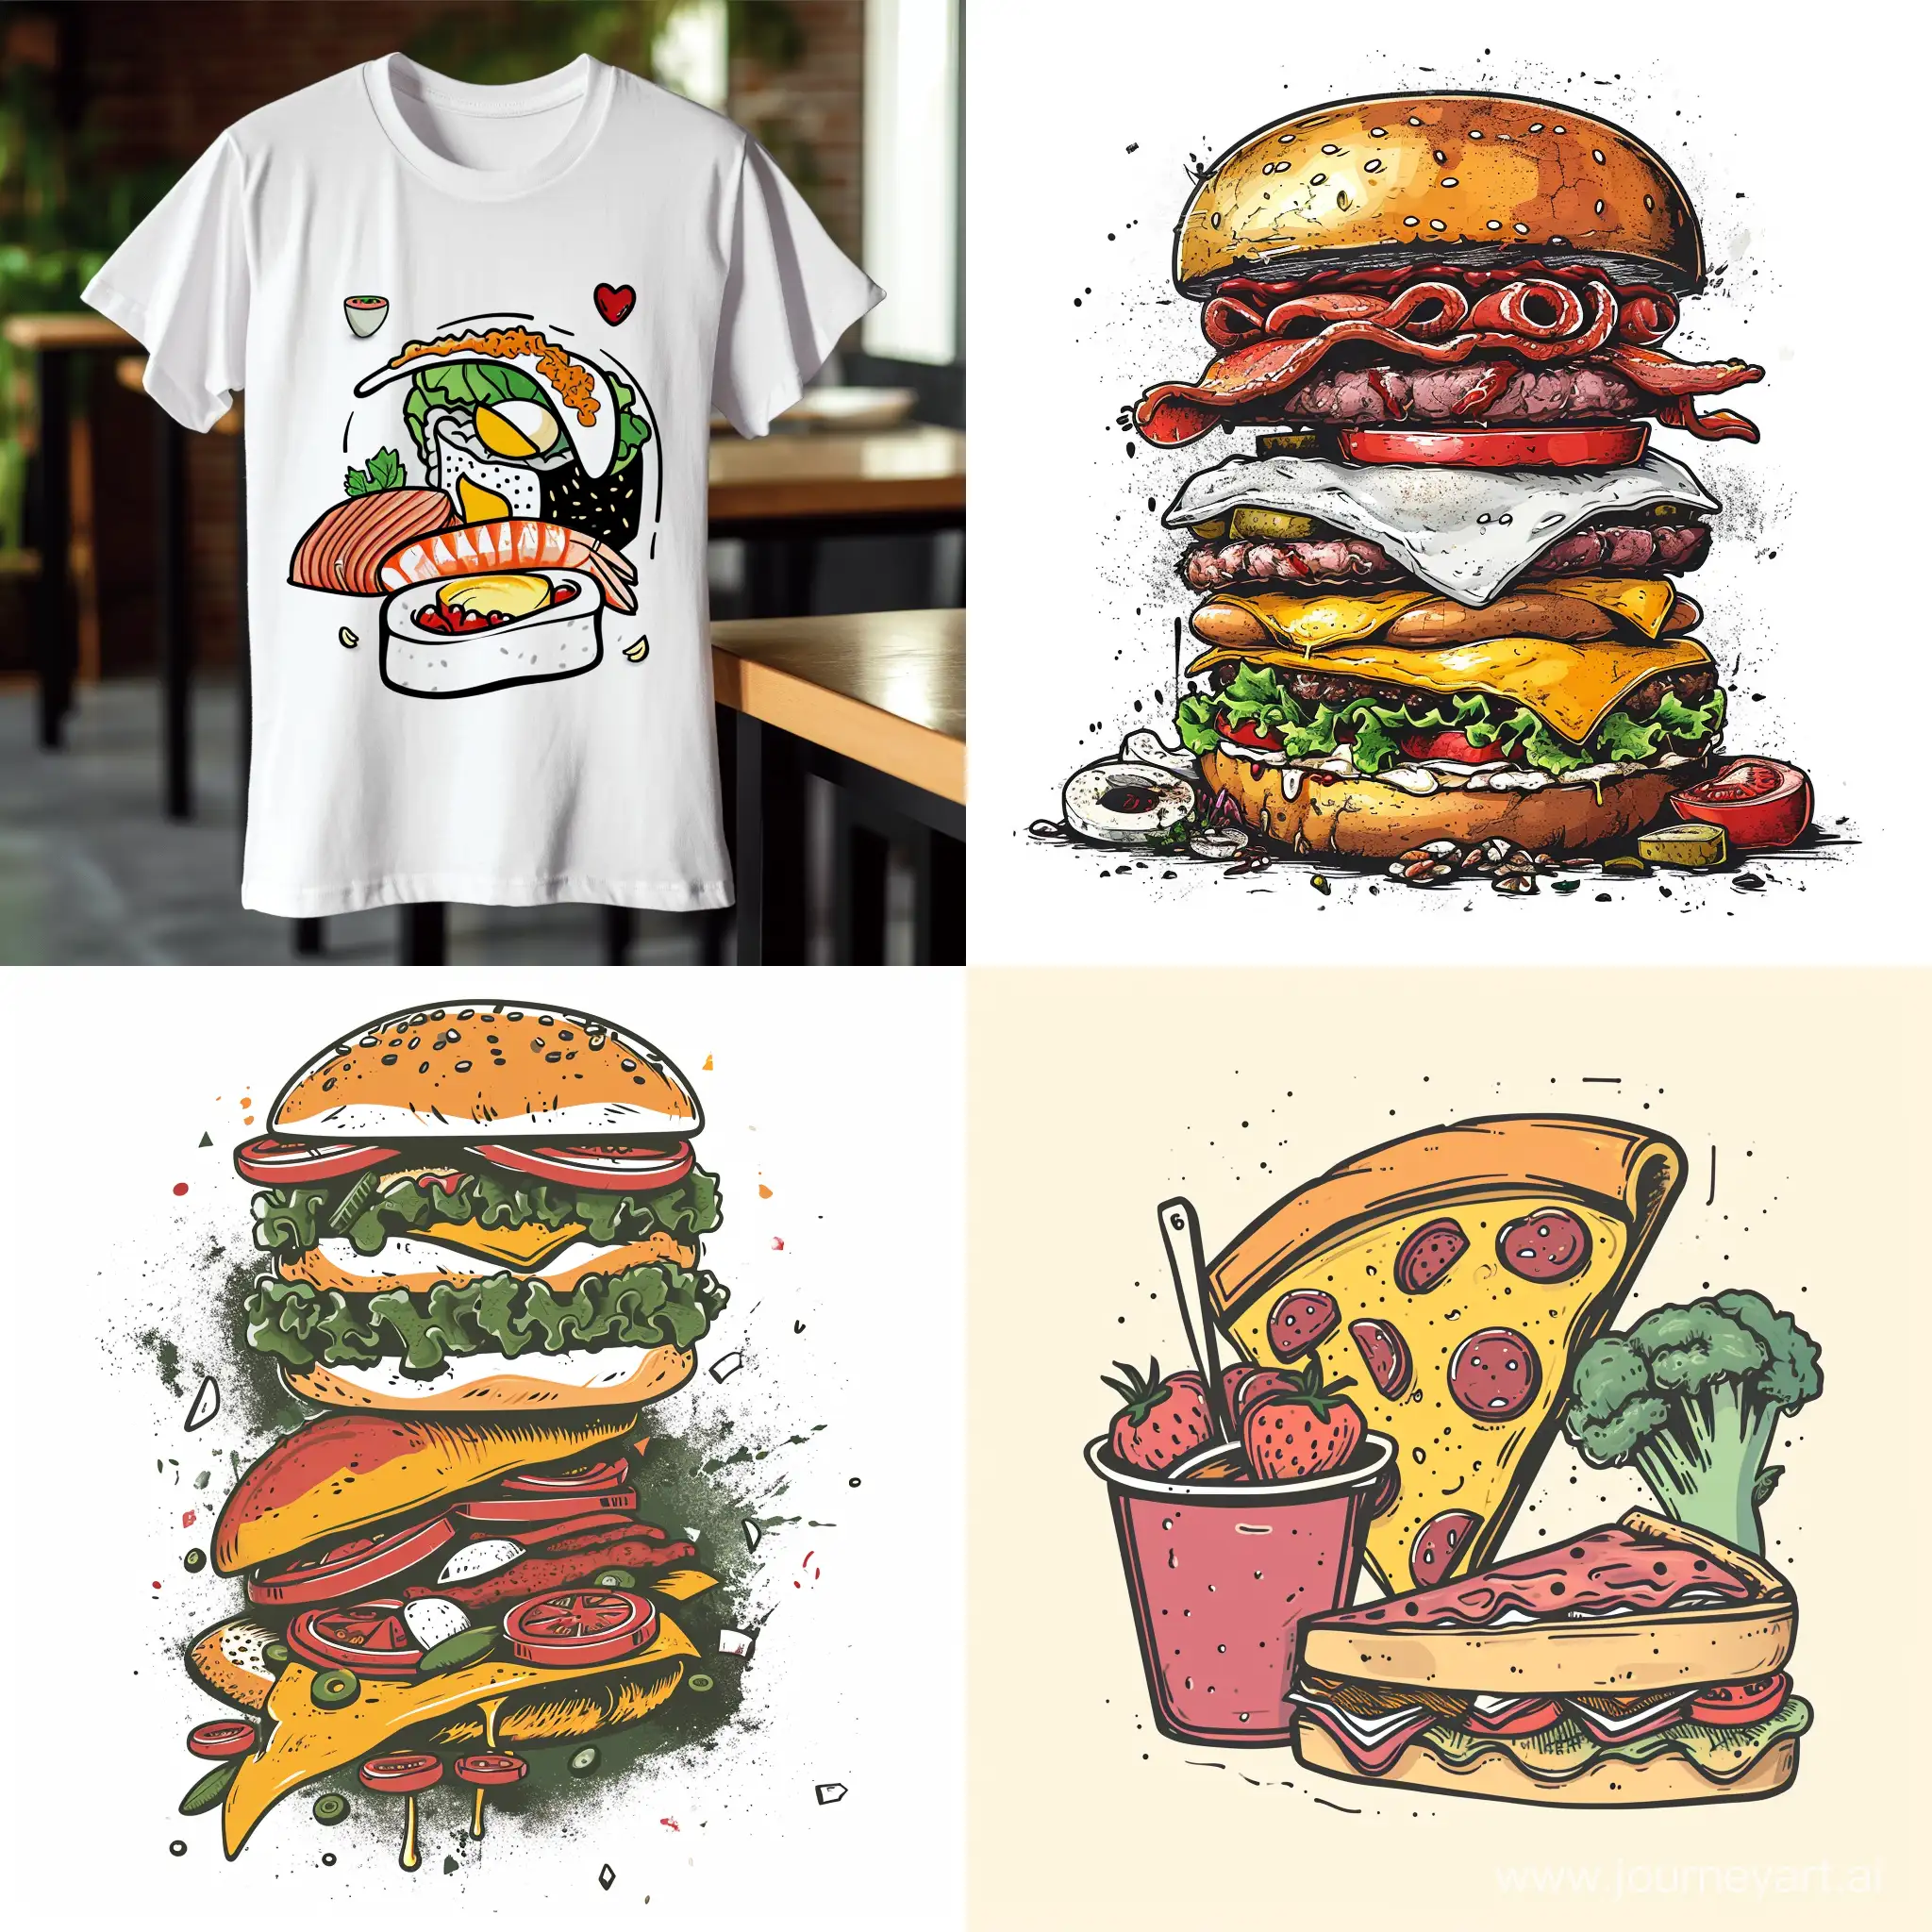 Delicious-Food-TShirt-Design-with-Vibrant-Colors